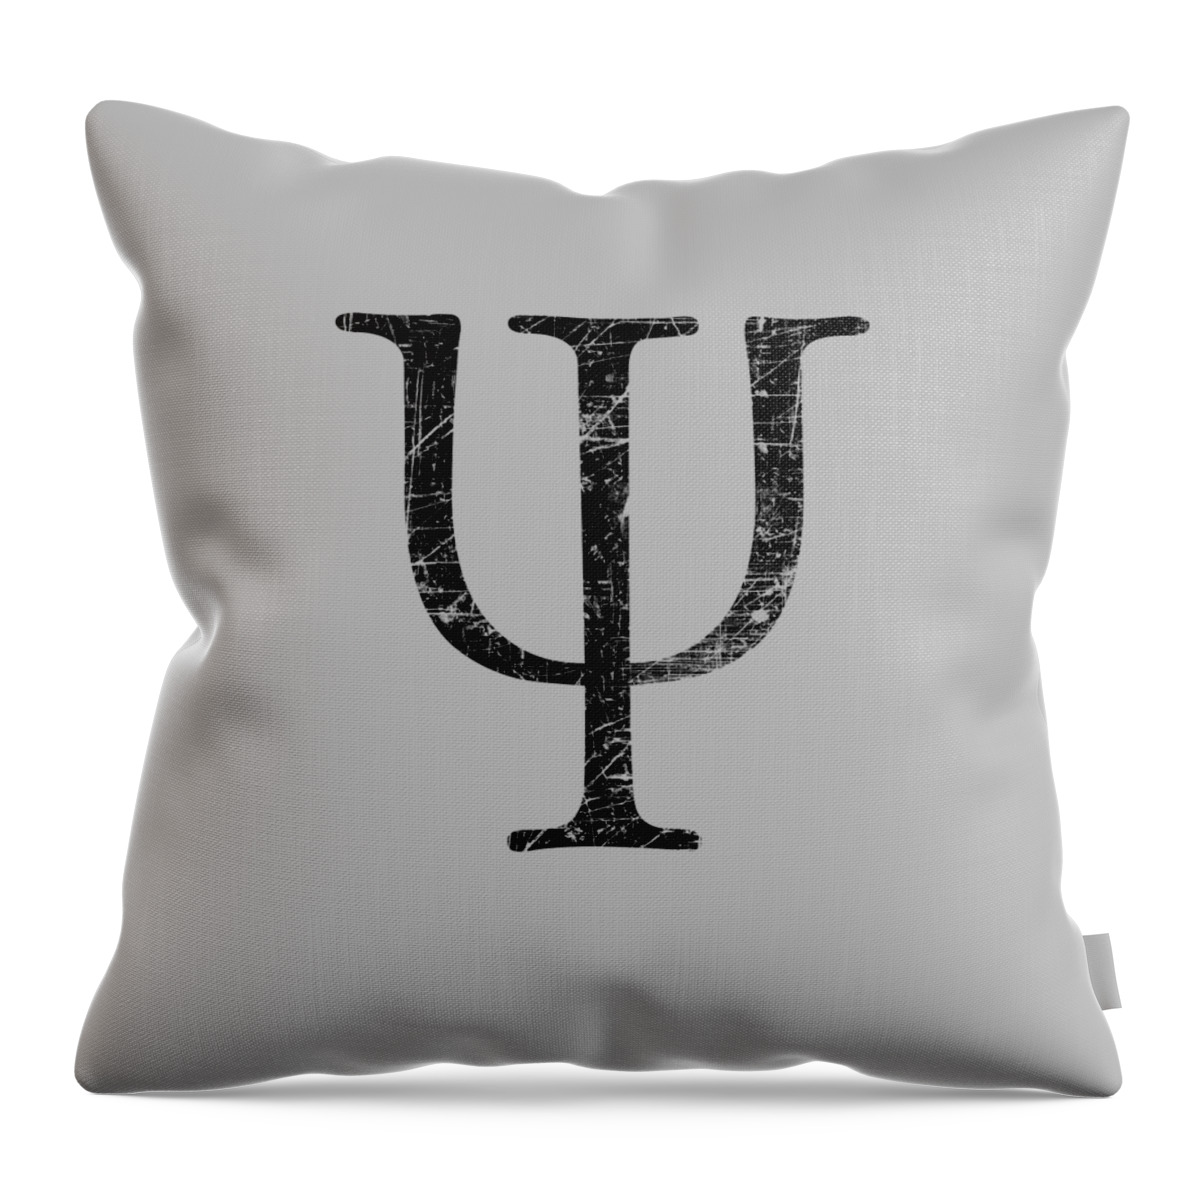 Psi Throw Pillow featuring the digital art Psi Greek Letter Symbol for Psychology by Garaga Designs